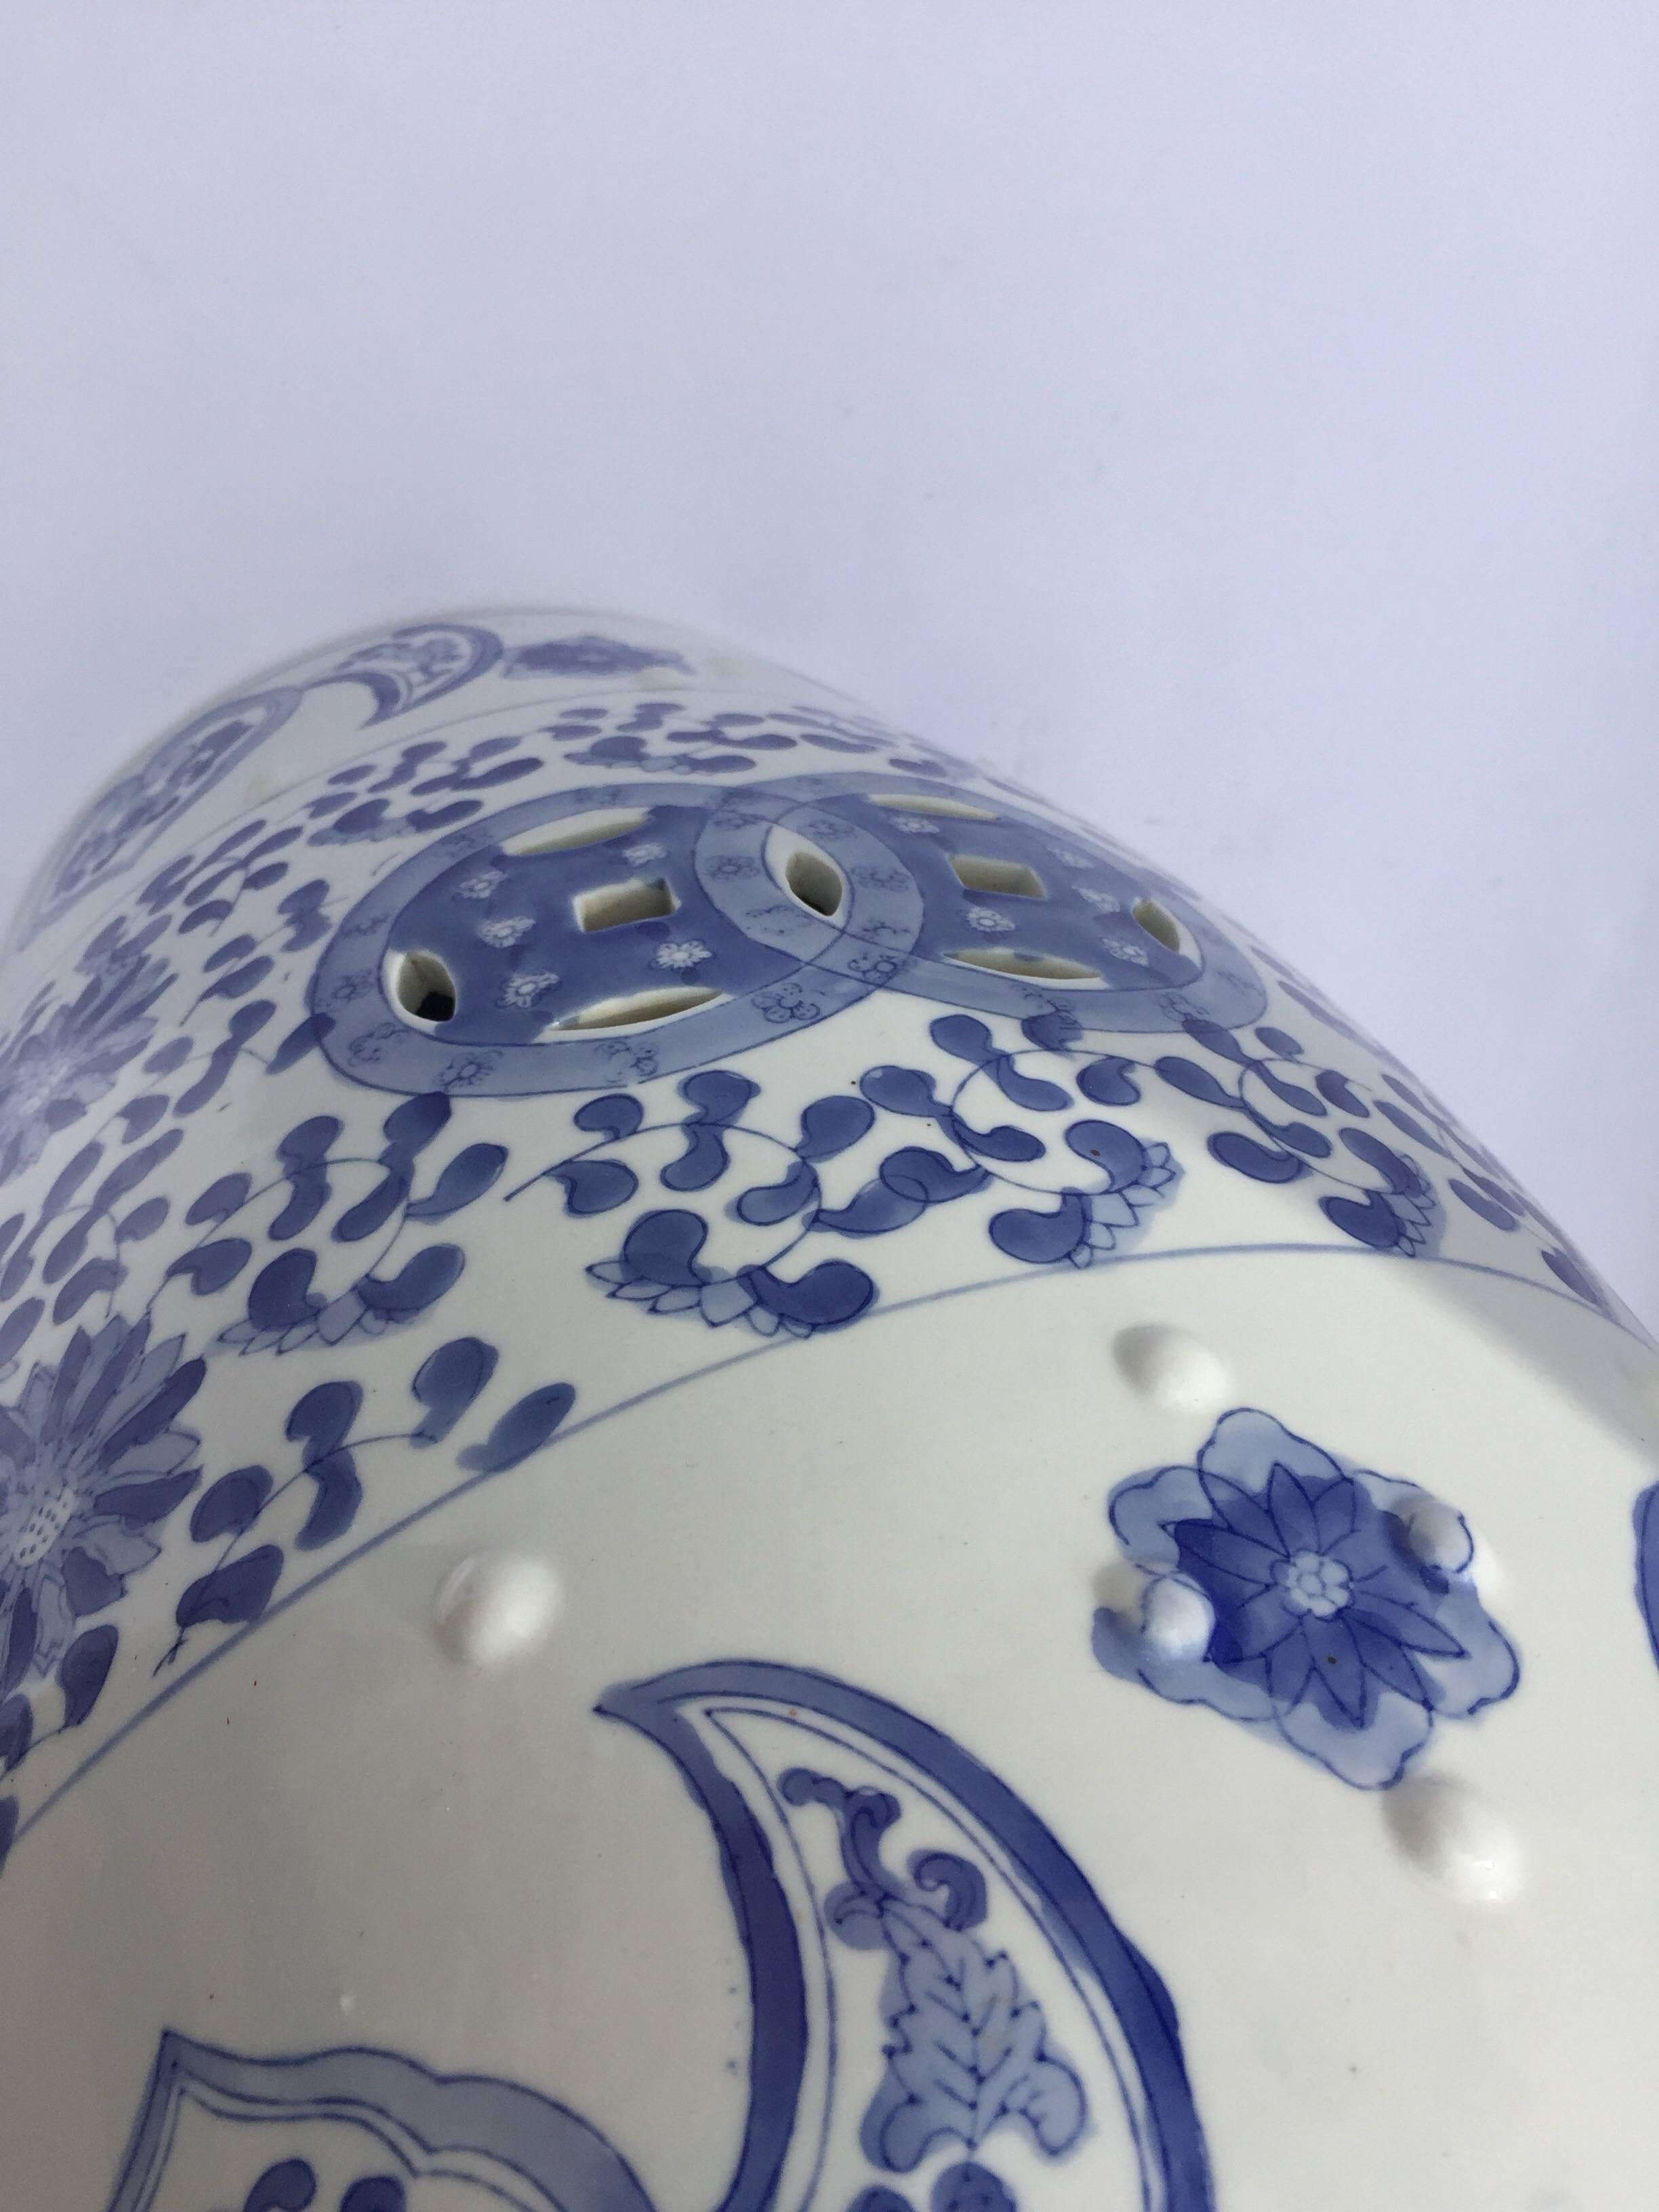 Hand-Crafted Ceramic Asian Garden Seat in Blue and White Floral Motifs For Sale